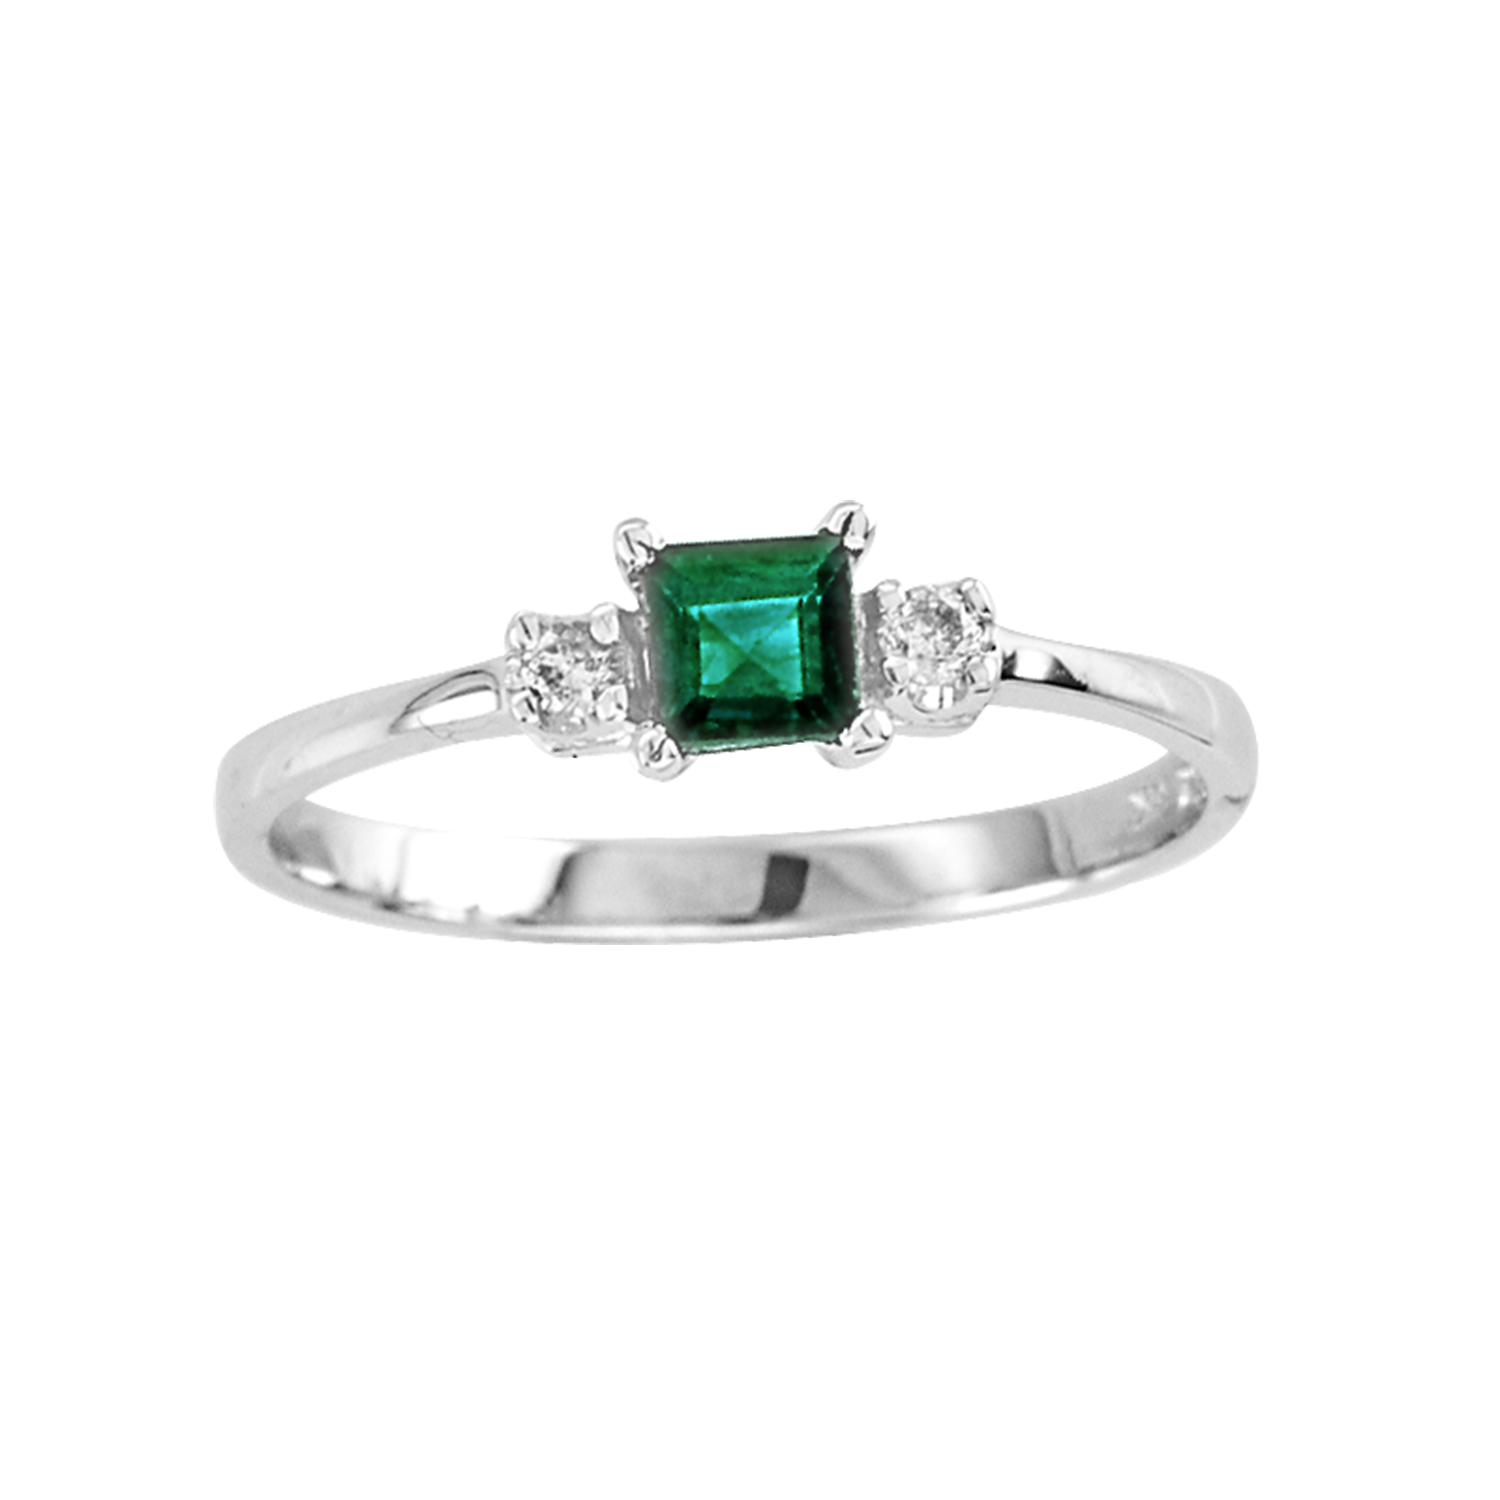 0.04ctw Diamond and Emerald Ring in 14k Gold